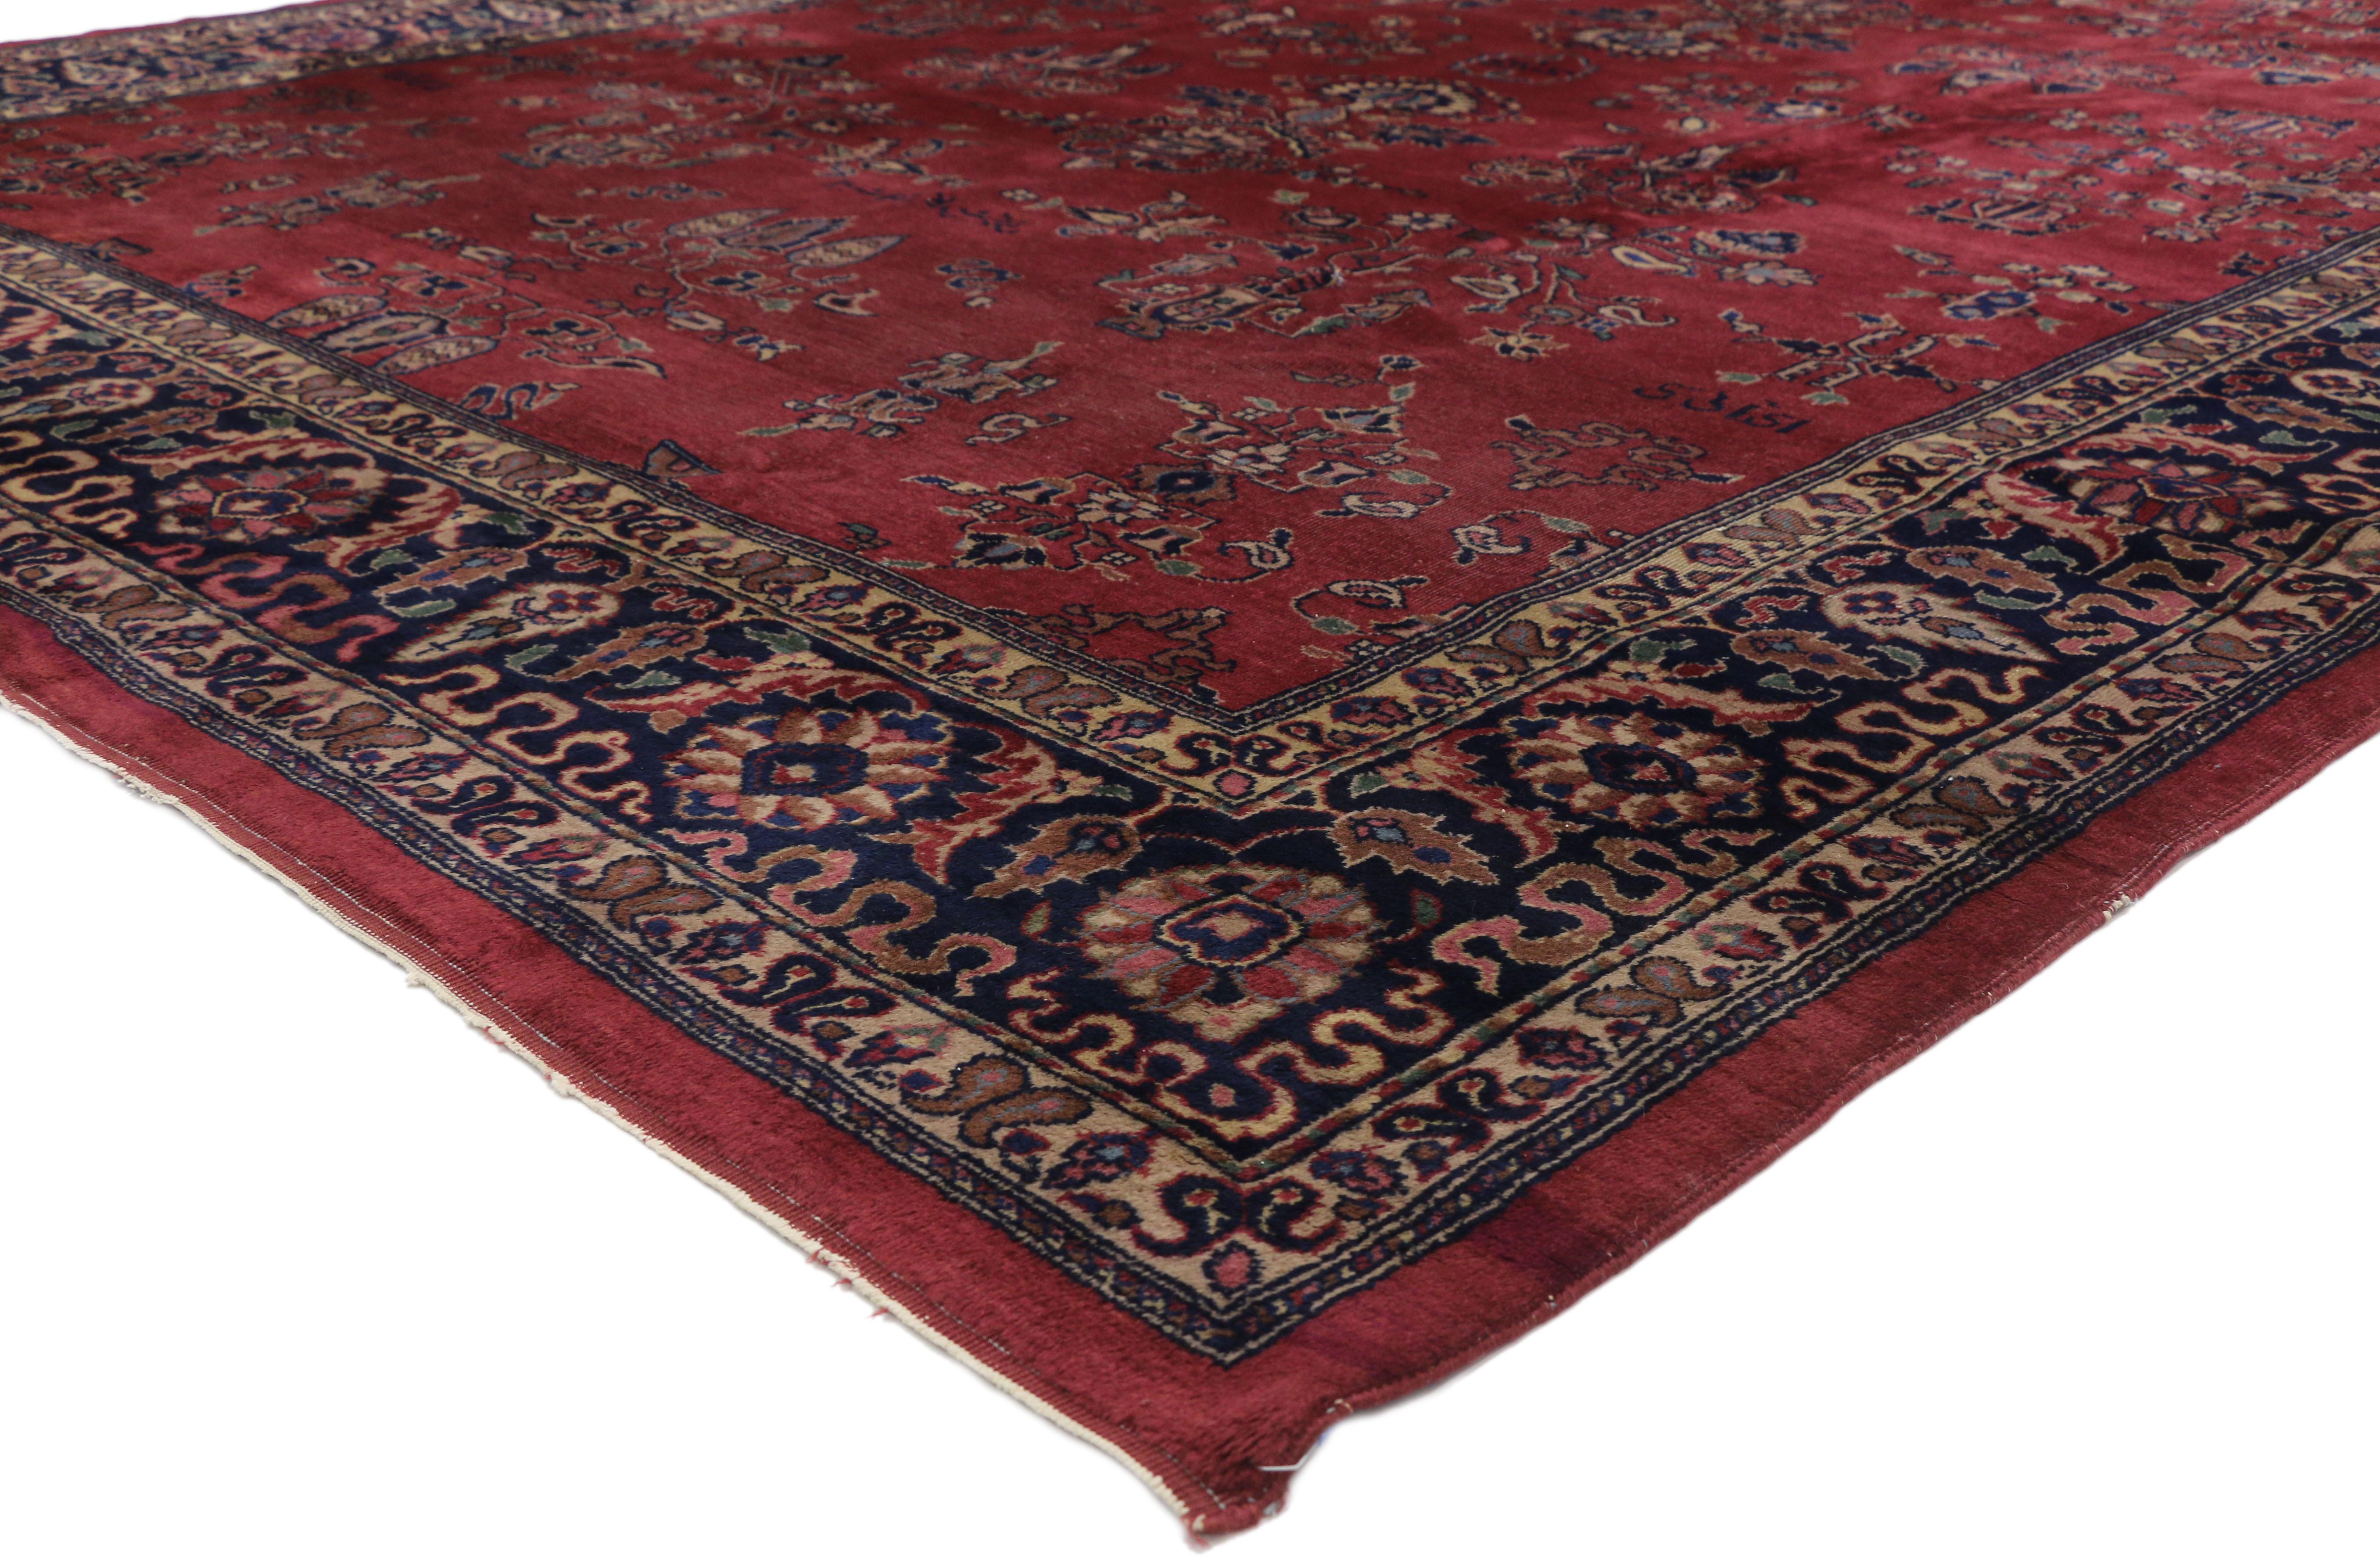 72040 Antique Turkish Sparta Rug with Regency Victorian Style. With its rich detailing, vibrant colors, and symmetry, this hand-knotted wool antique Turkish Sparta rug beautifully highlights a Venetian Regency style. It features an all-over floral